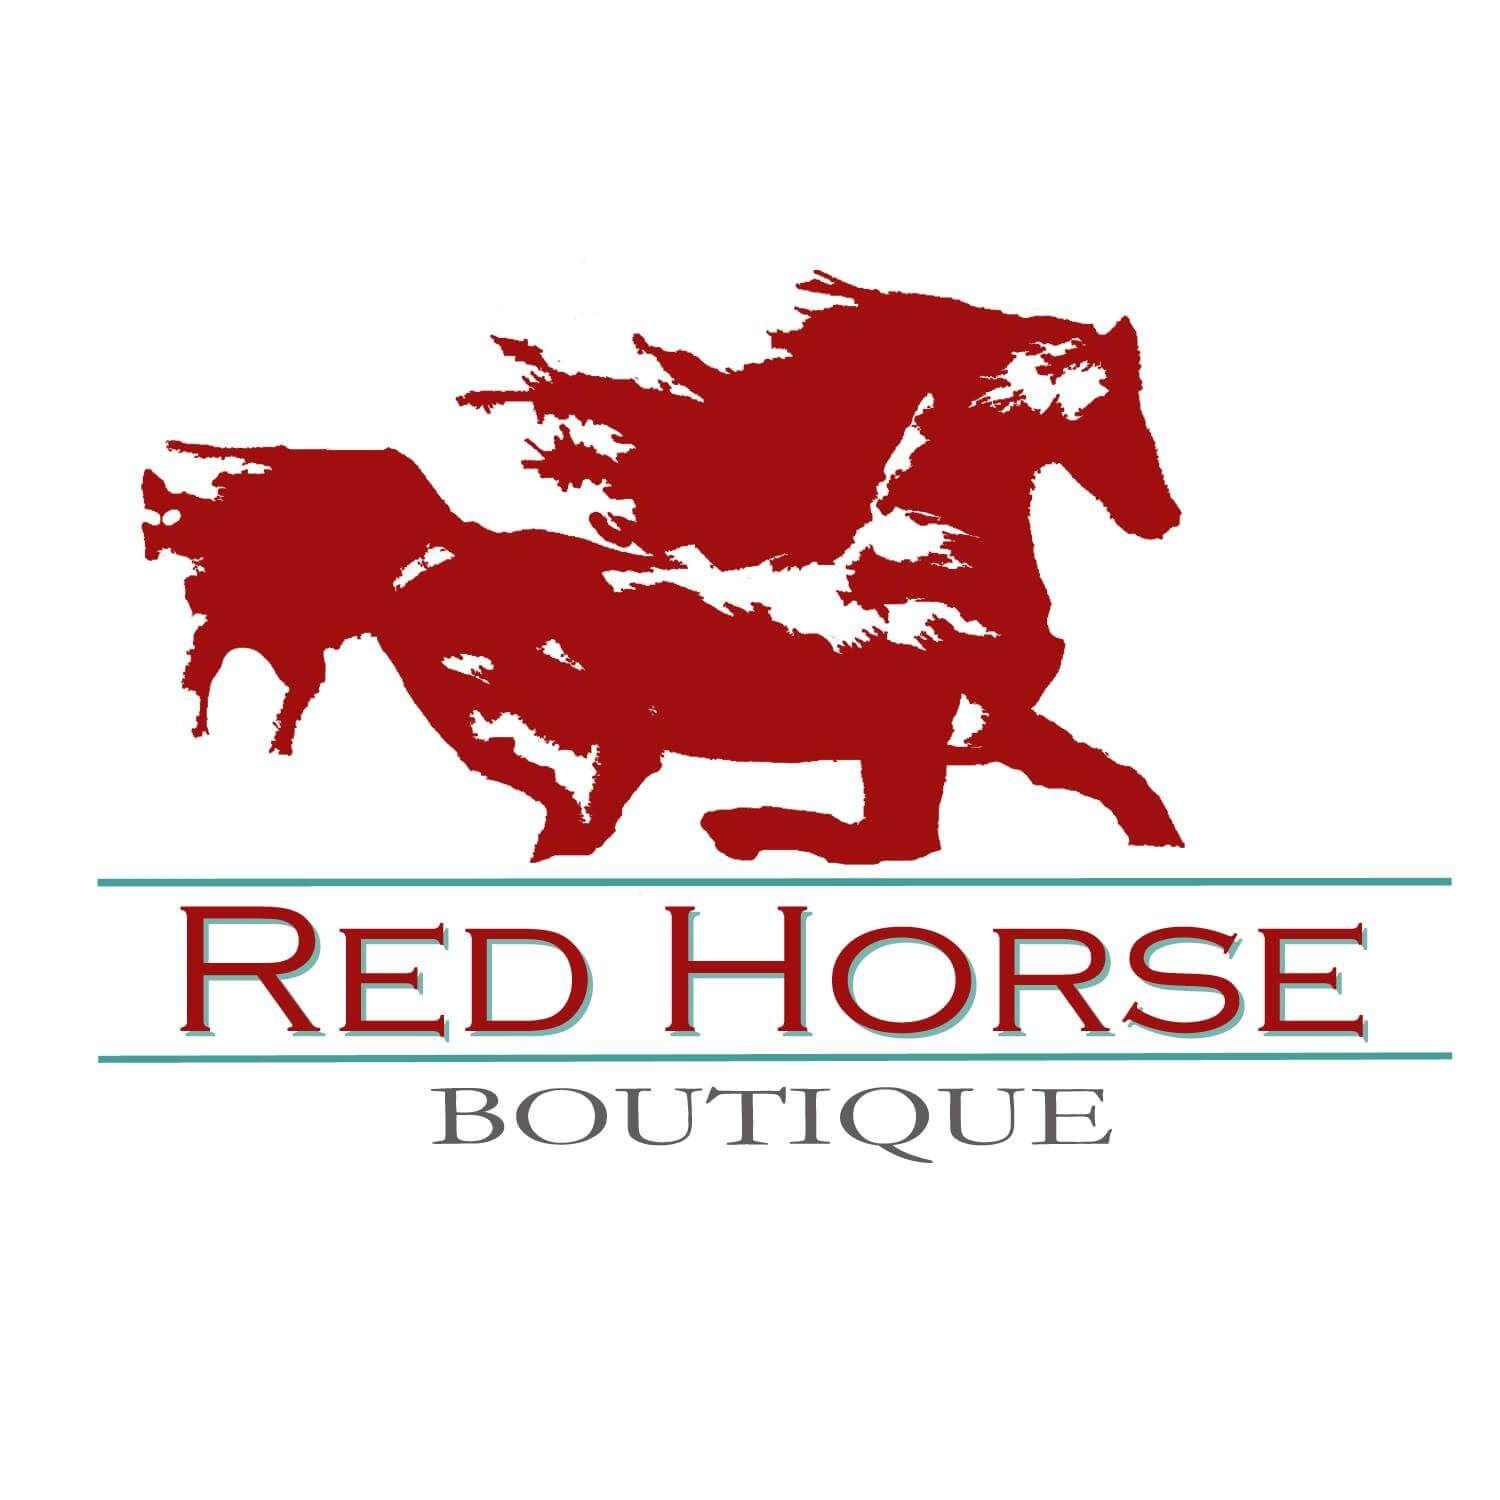 Red Horse Logo - Red Horse Boutique - The Shops At Willow Park